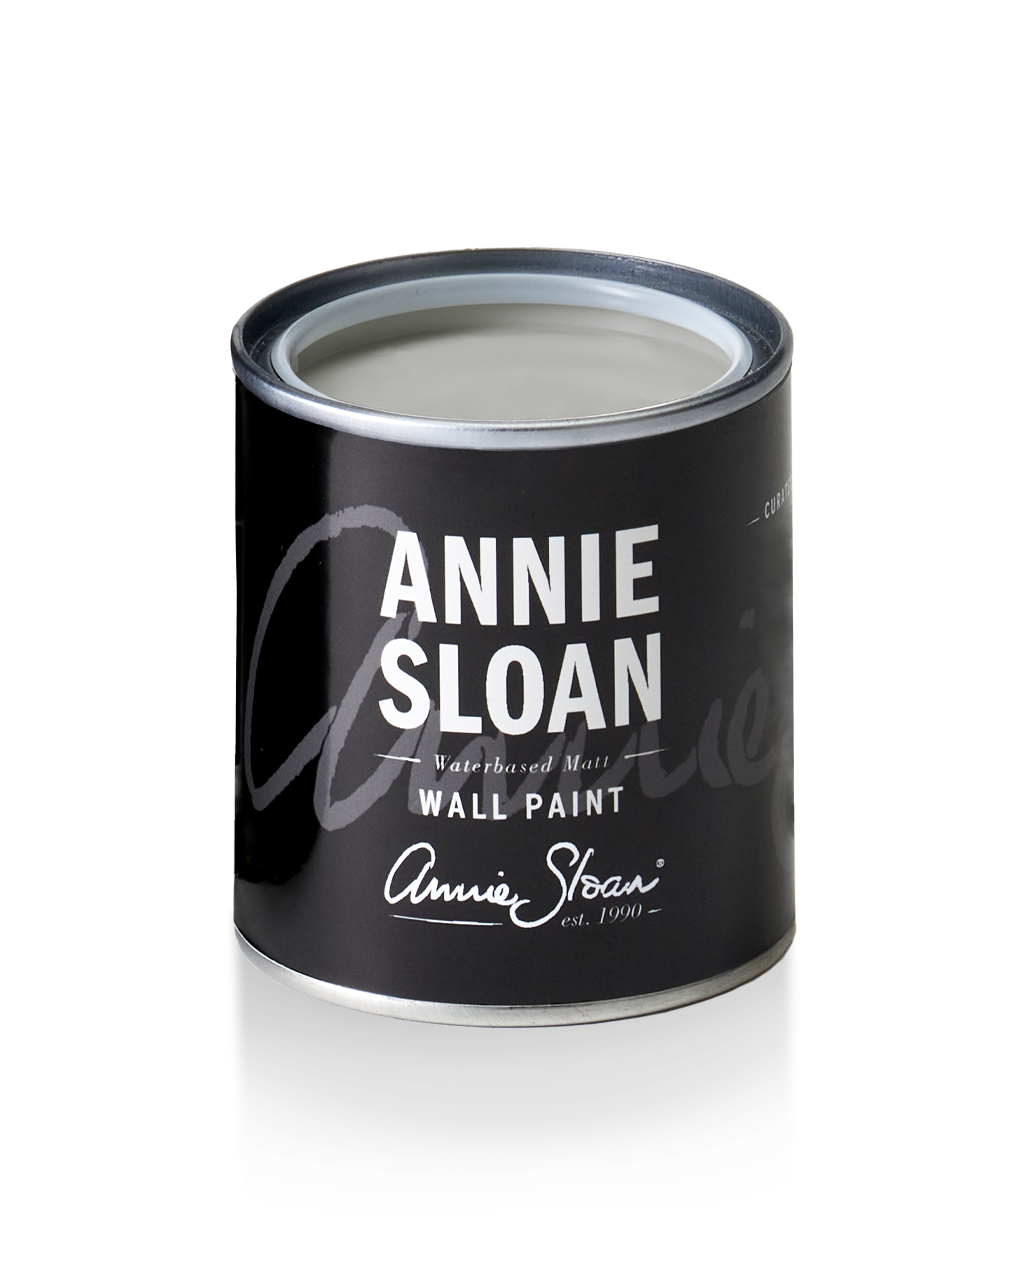 120ml tin of Chicago Grey wall paint by Annie Sloan